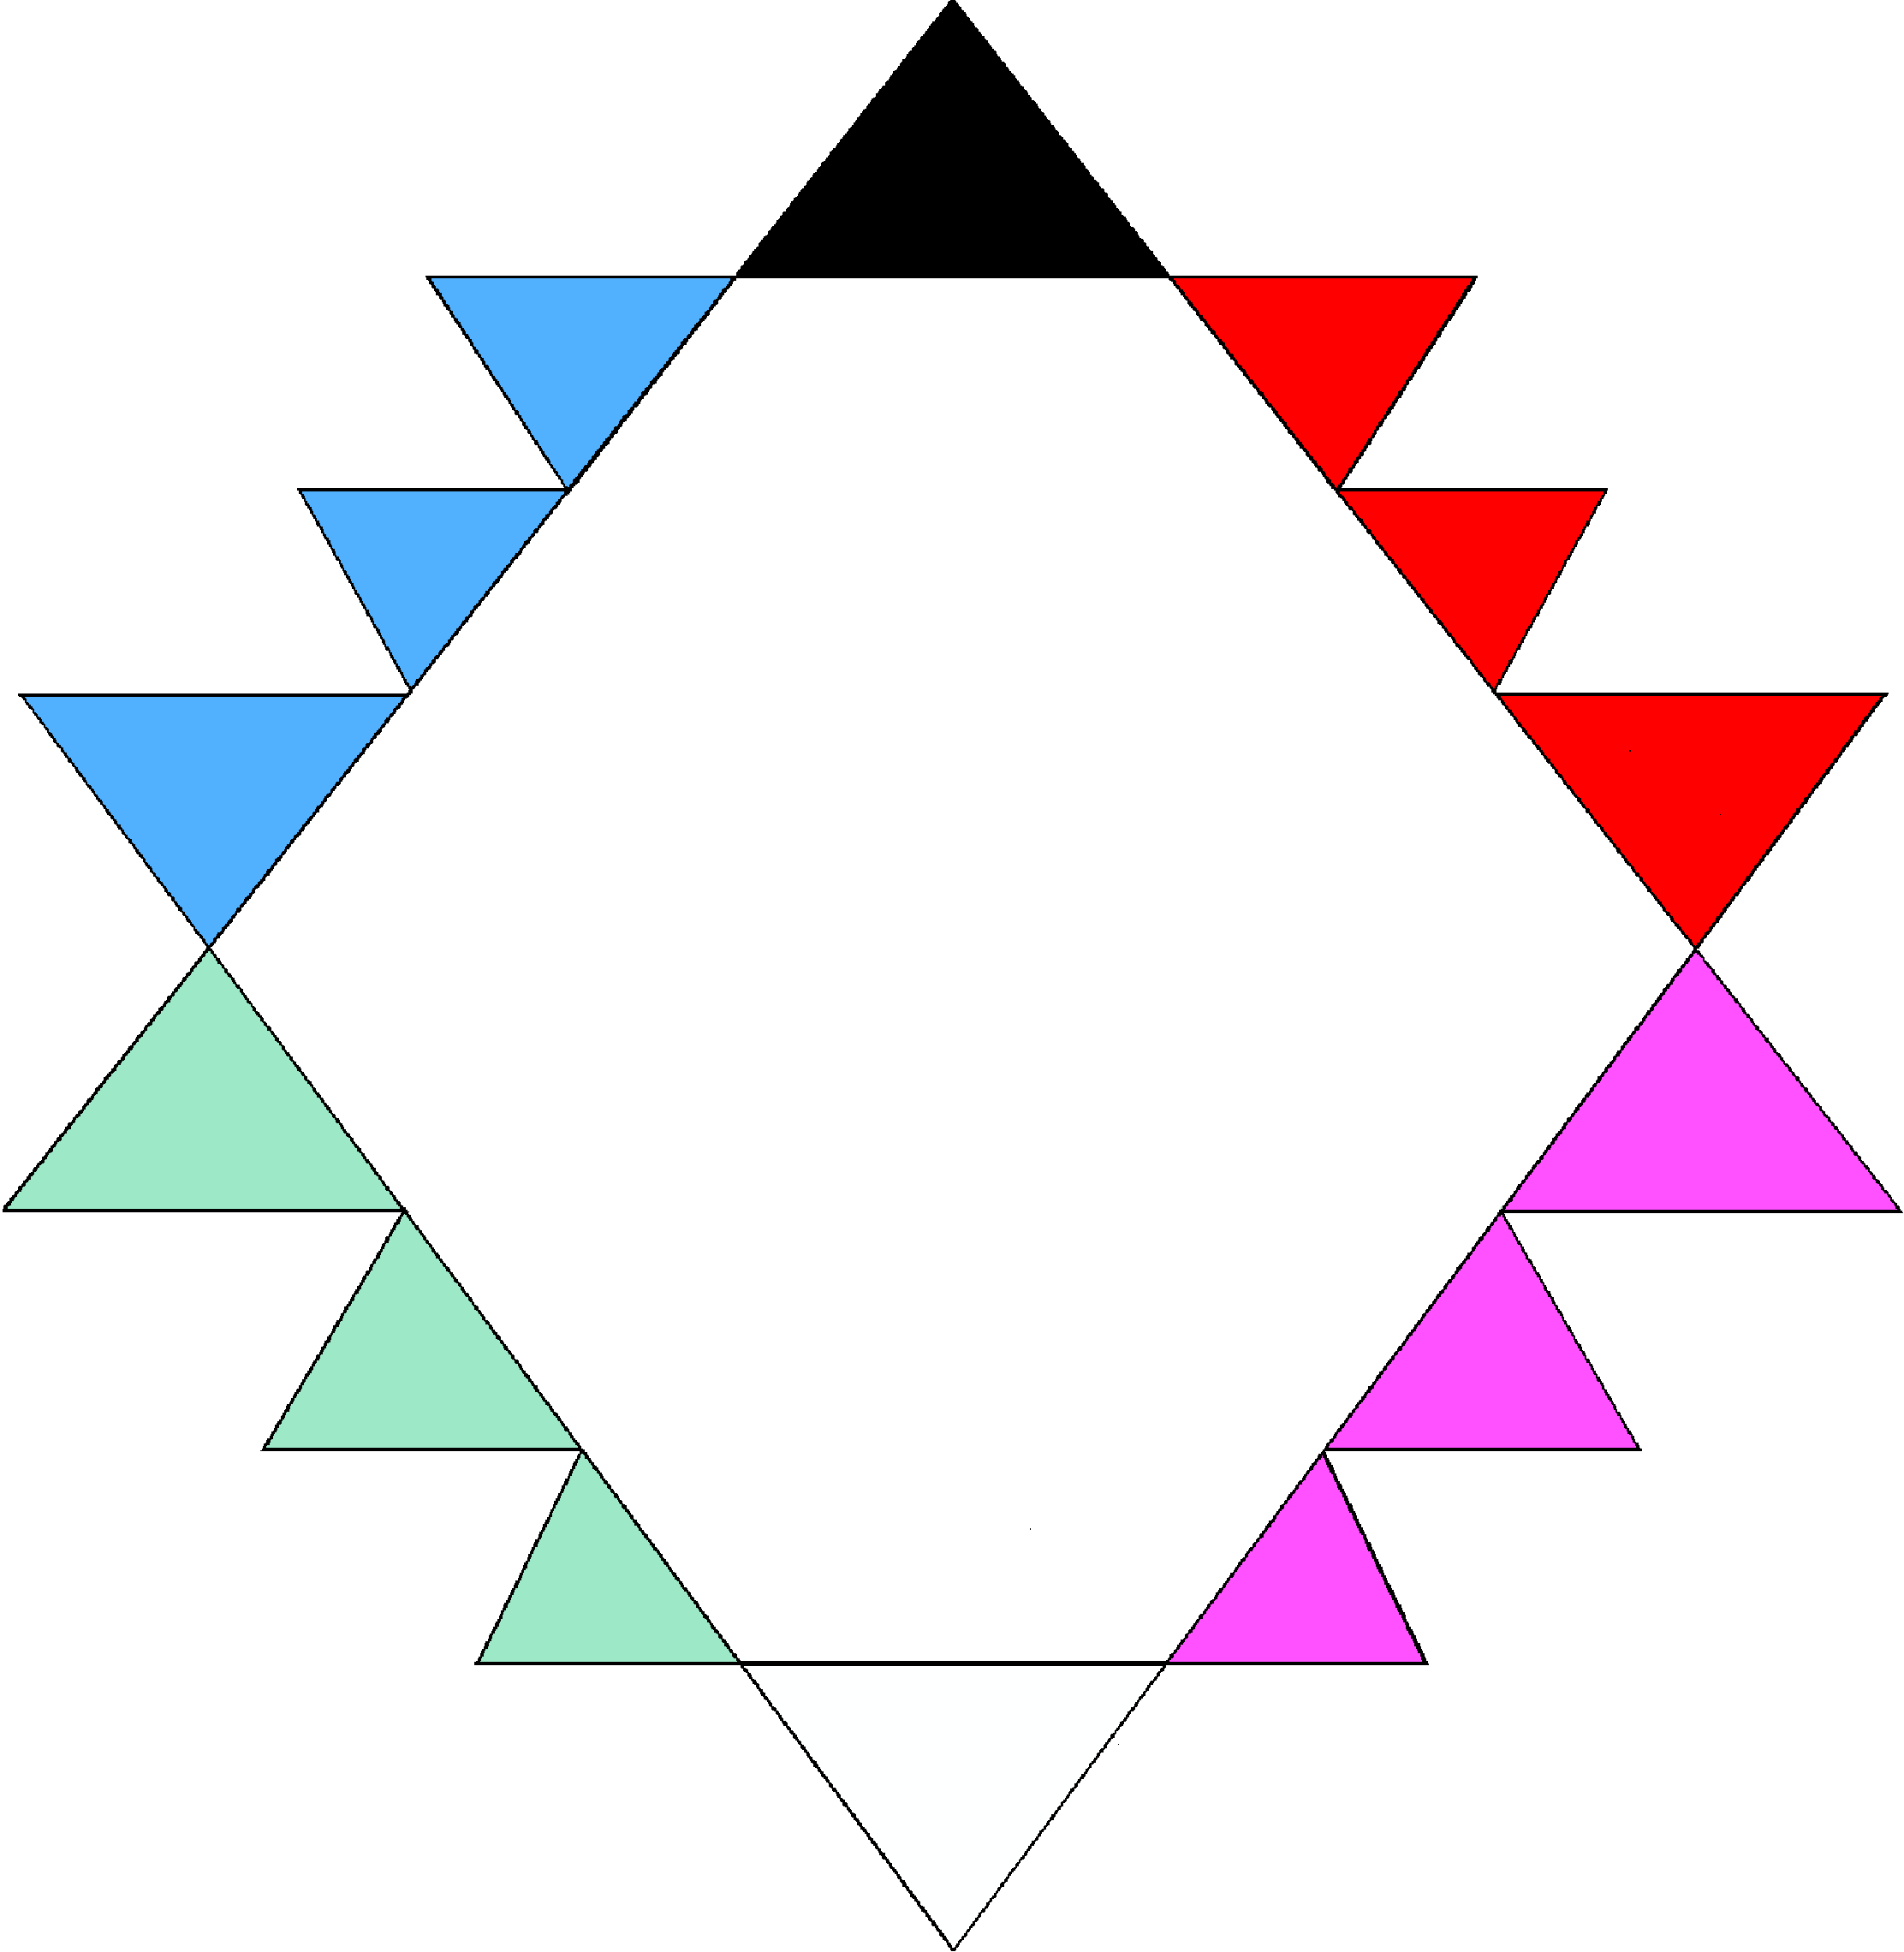 3-3-1 division in 4th layer of triangles